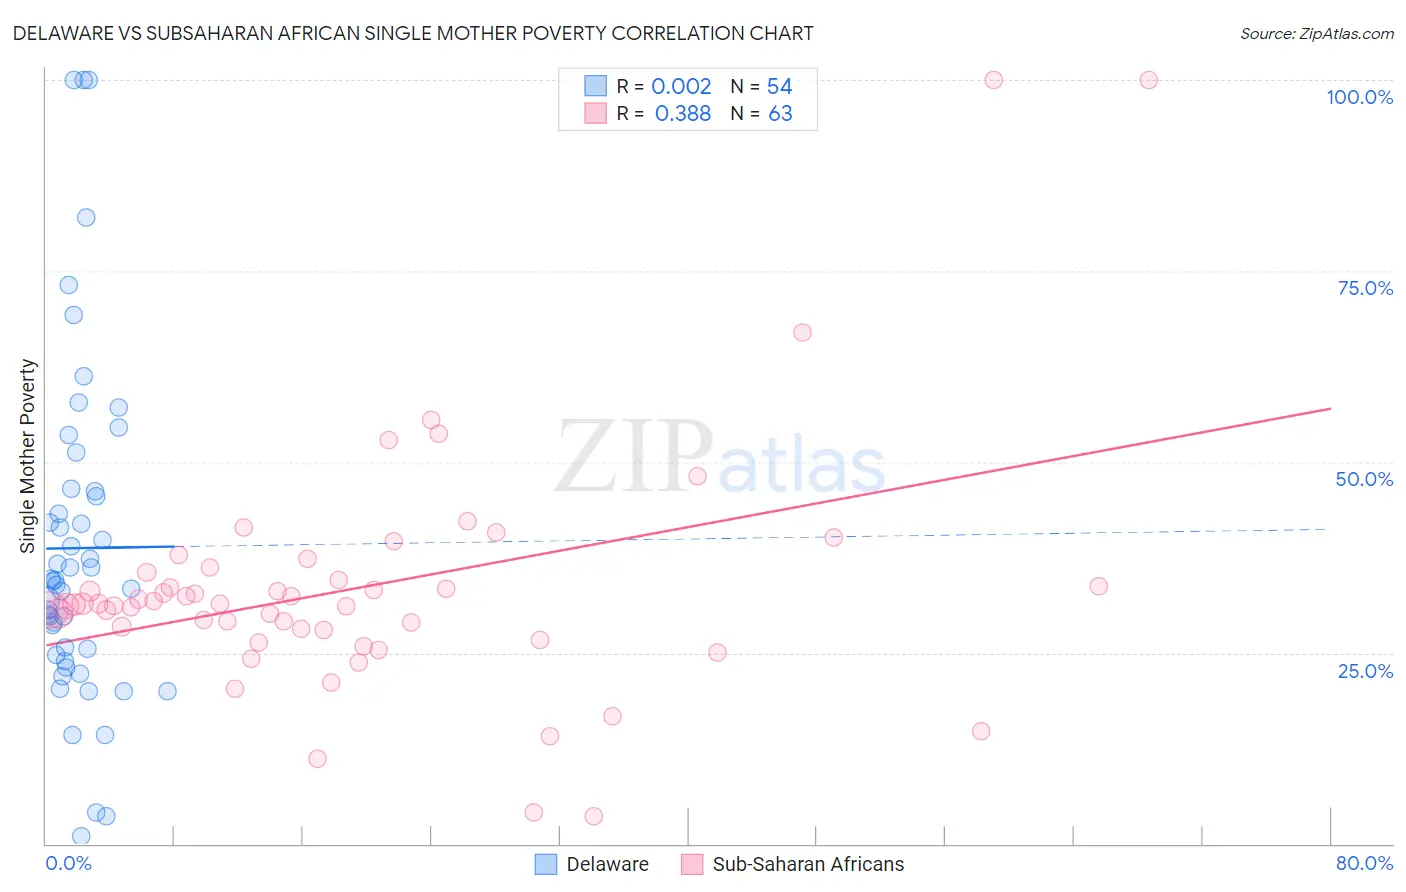 Delaware vs Subsaharan African Single Mother Poverty